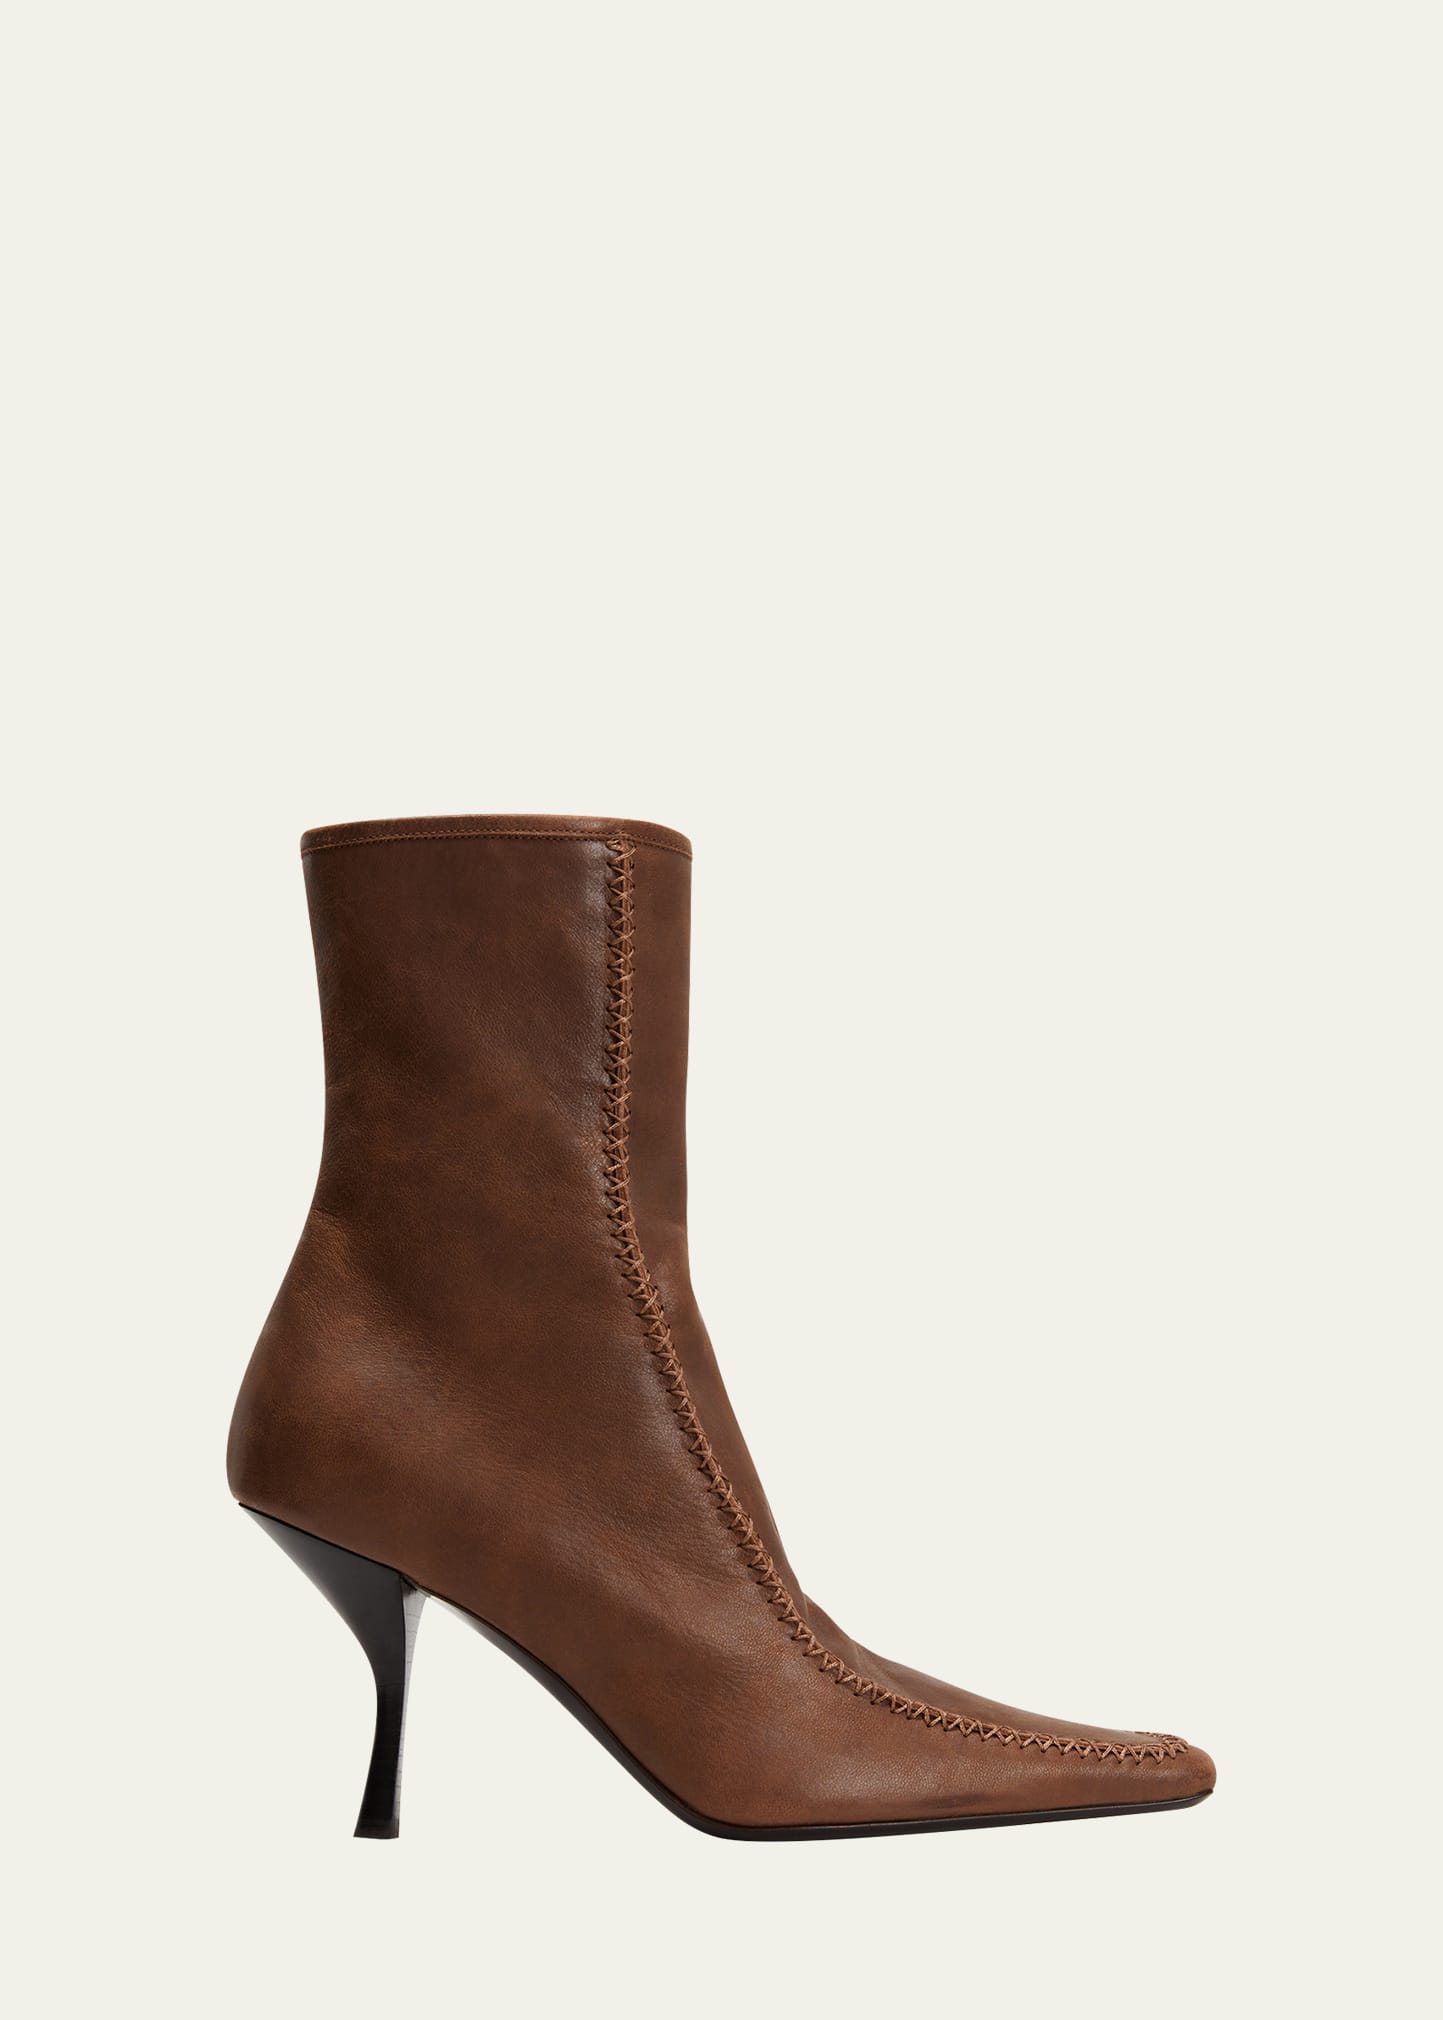 THE ROW Romy Leather Stiletto Ankle Booties